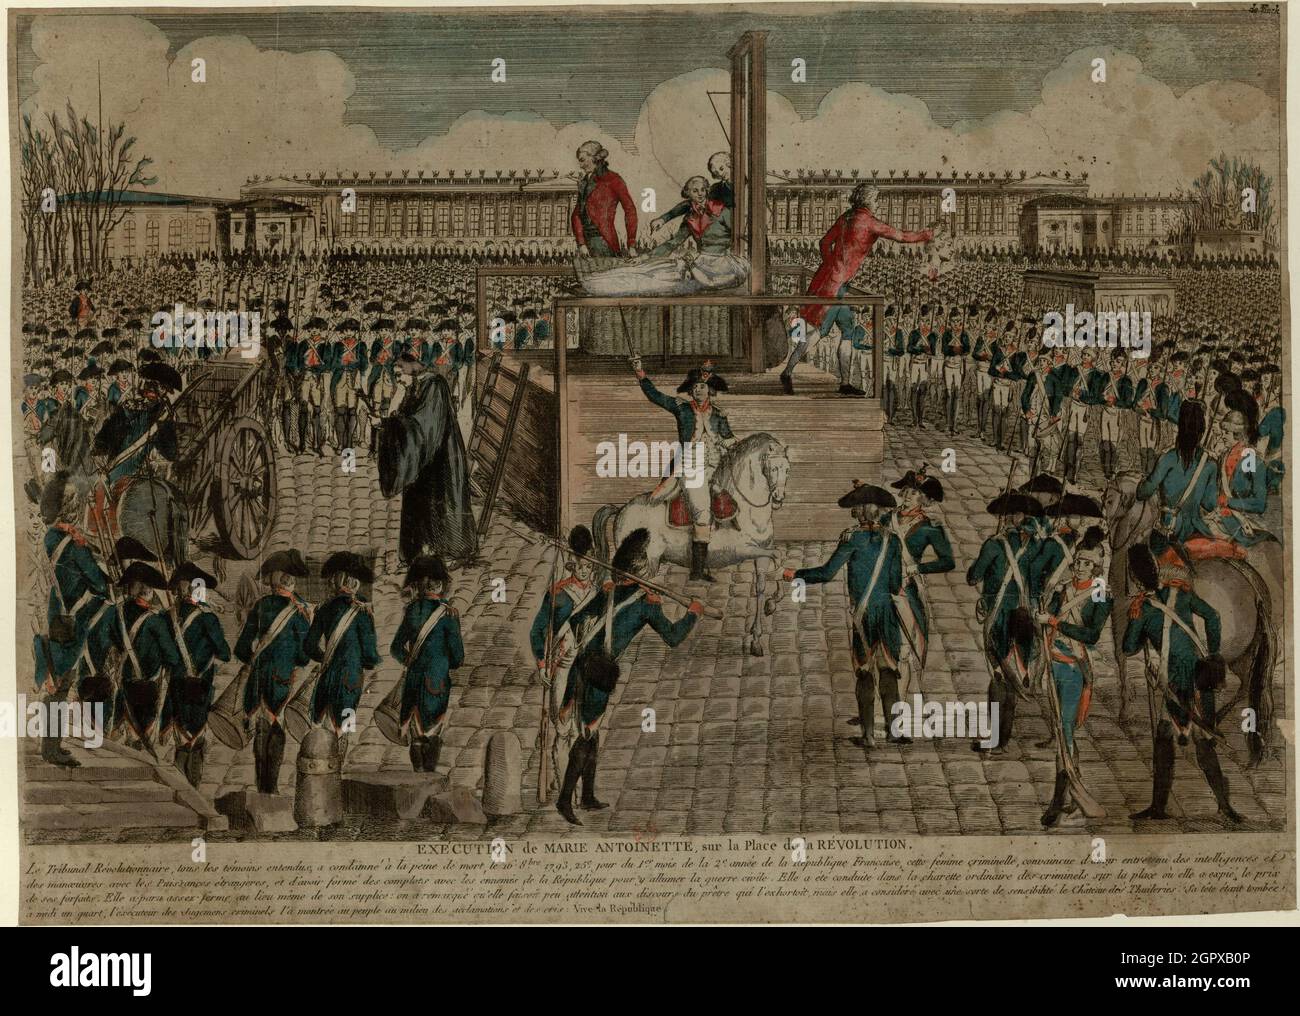 The Execution of Marie Antoinette on the Place de la Revolution on October 16, 1793, c. 1793. Found in the Collection of the Biblioth&#xe8;que Nationale de France. Stock Photo